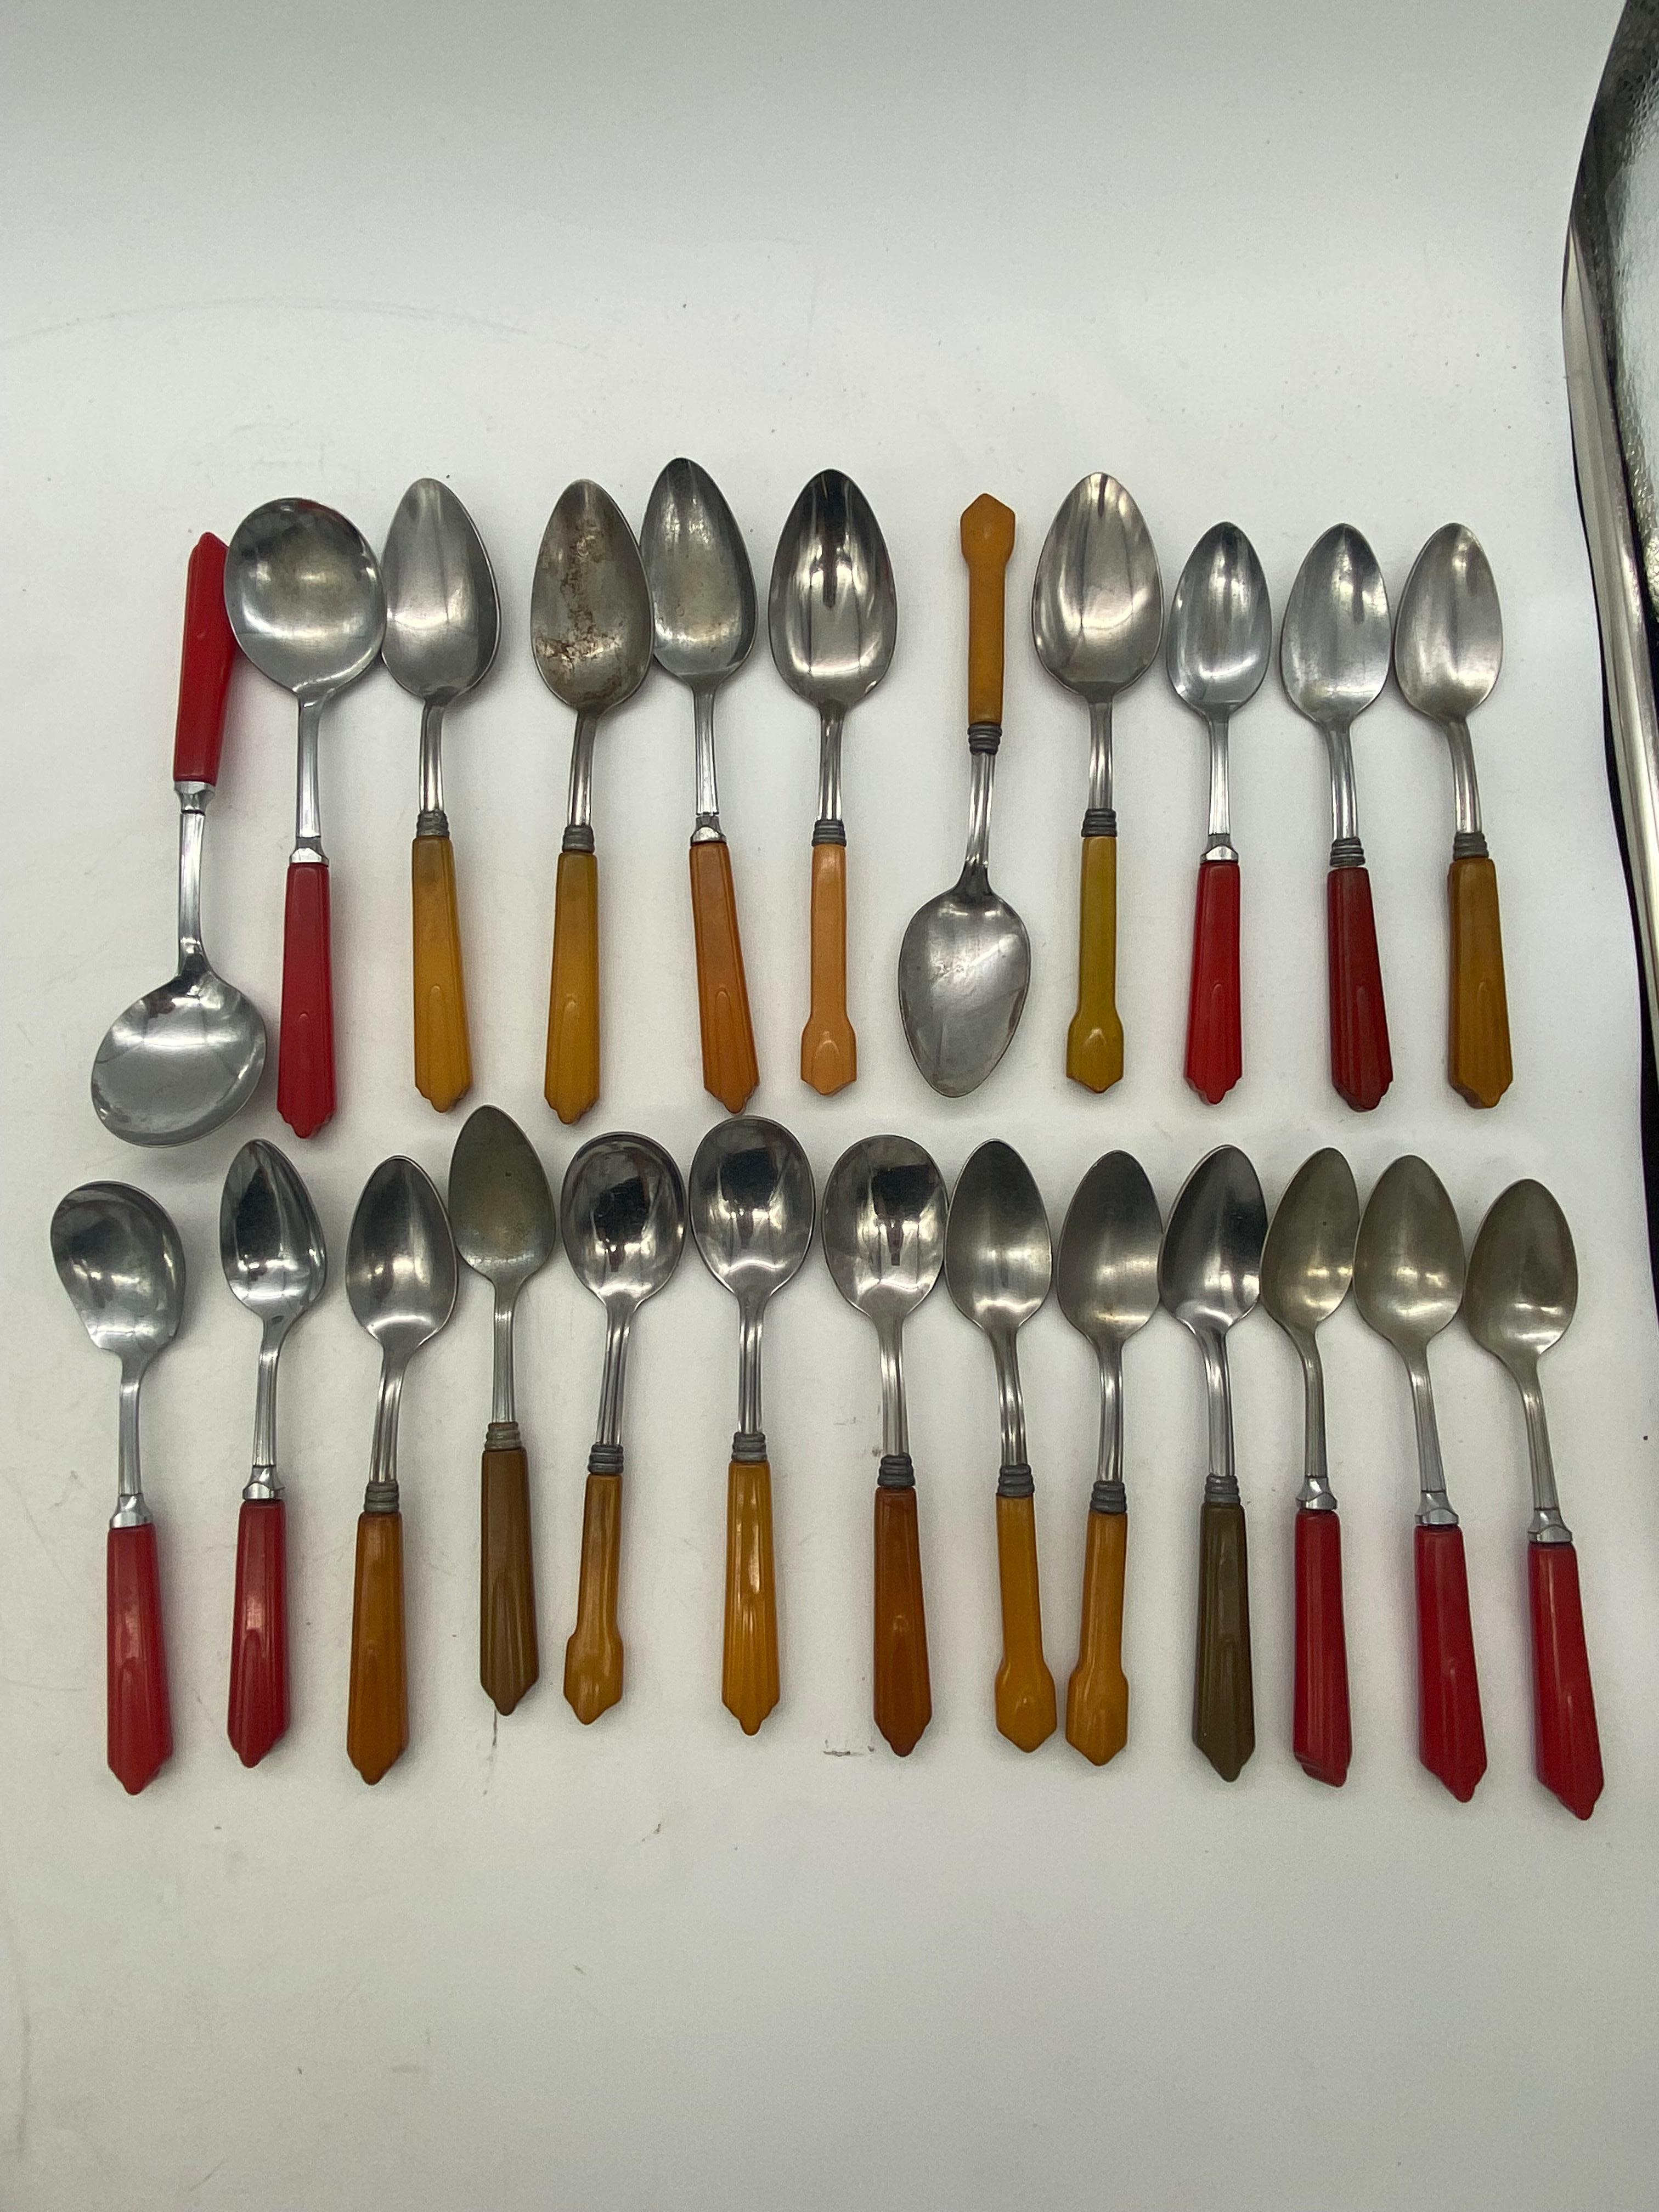 Extremely rare and large collection of bakelite, ver rare set of fiesta bakelite stainless steel varieties that range from red, brown, butterscotch, yellow green and even some rare black bakelite. Inspired by the influence of art deco we have two